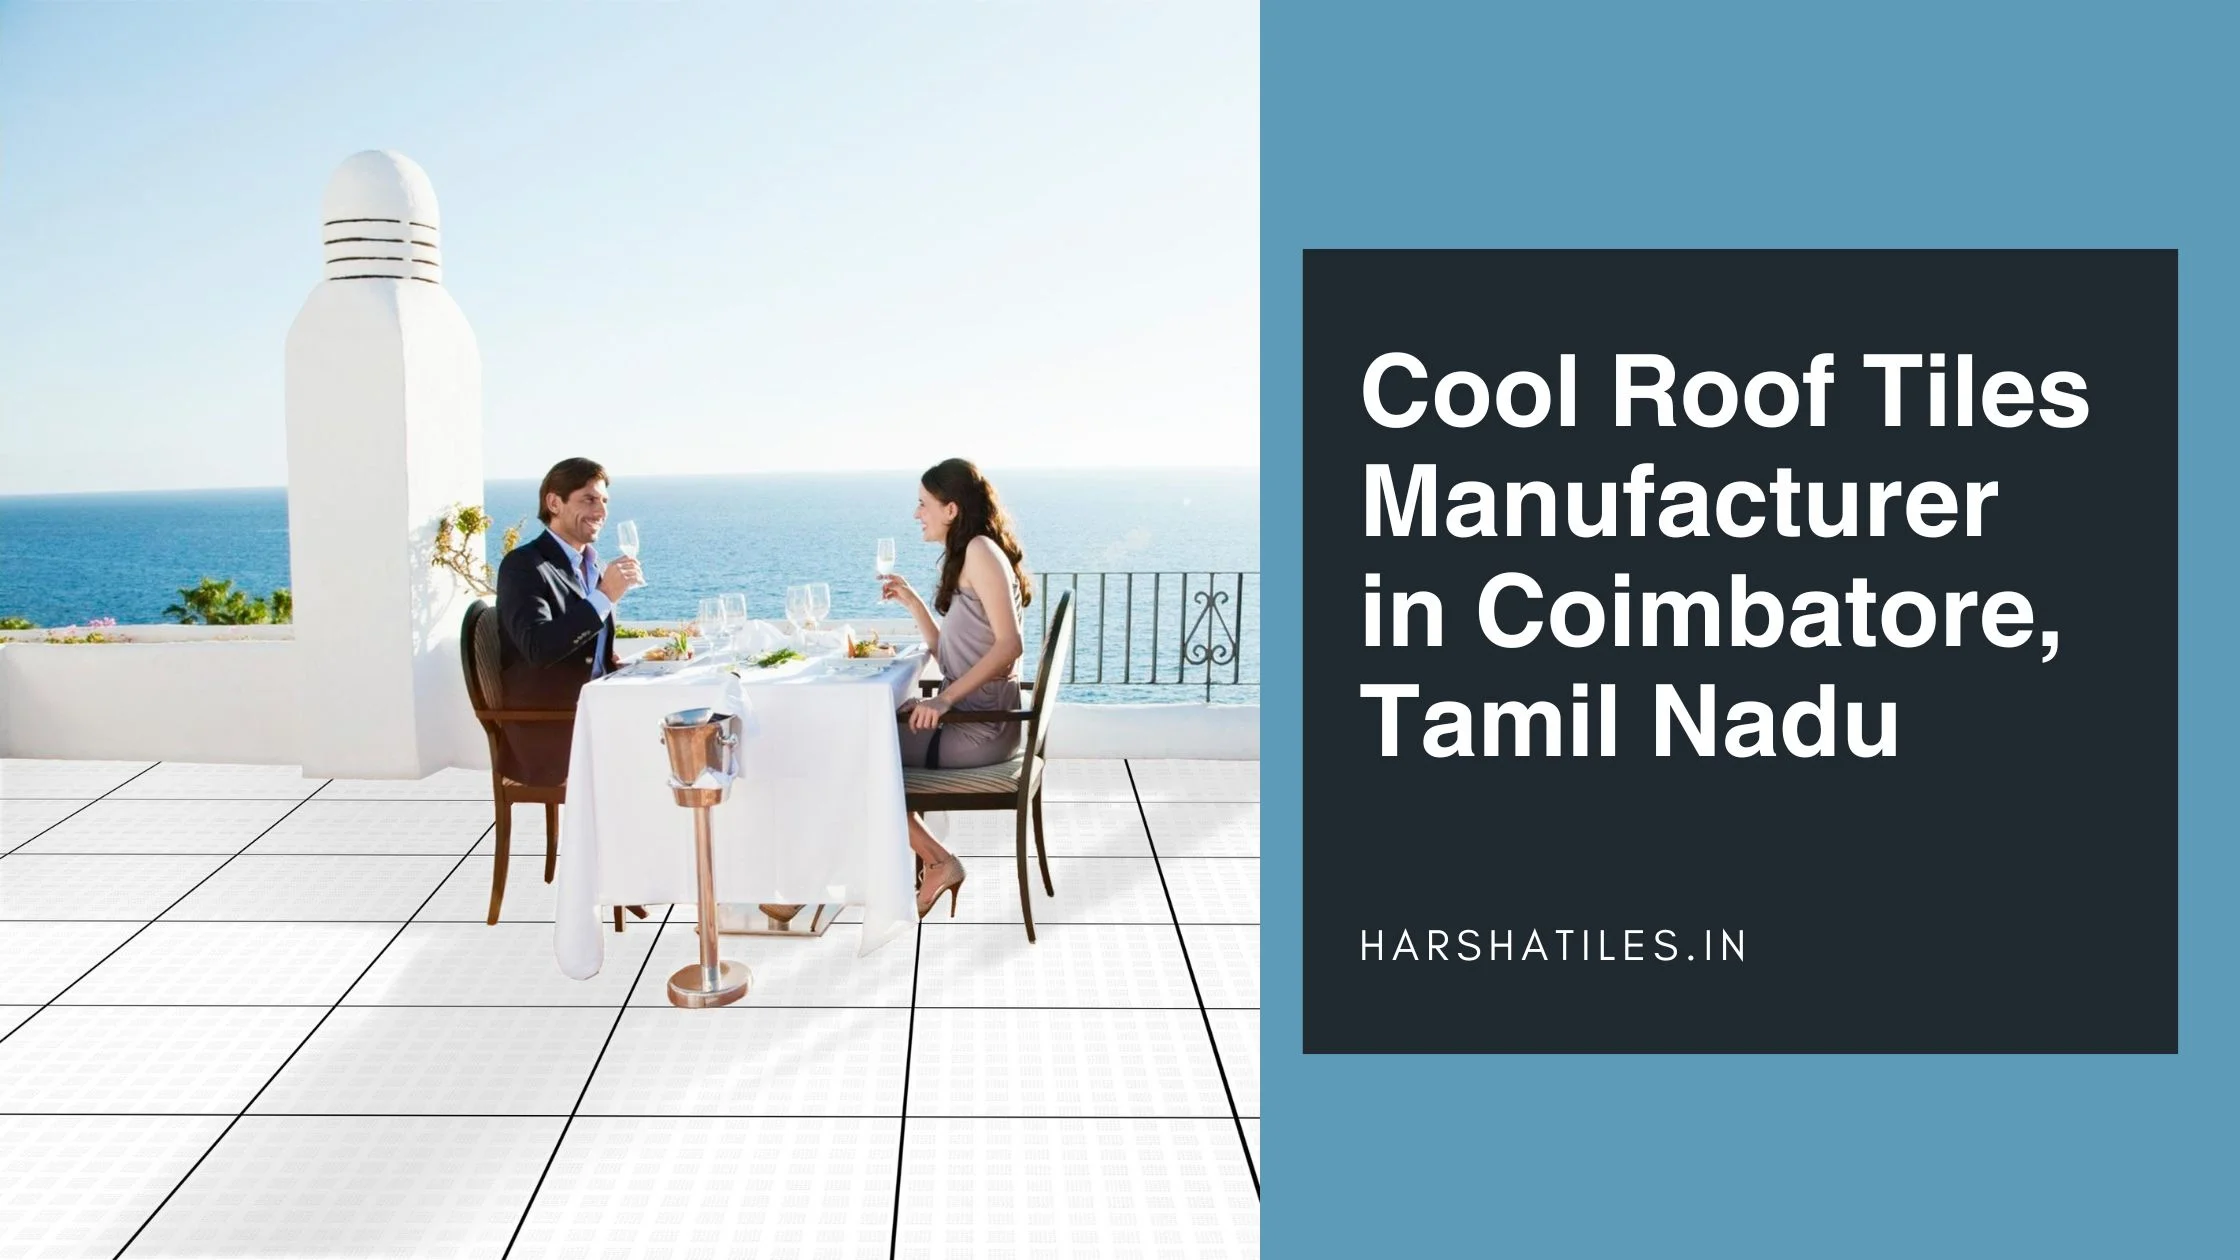 Cool Roof Tiles Manufacturer in Coimbatore, Tamil Nadu